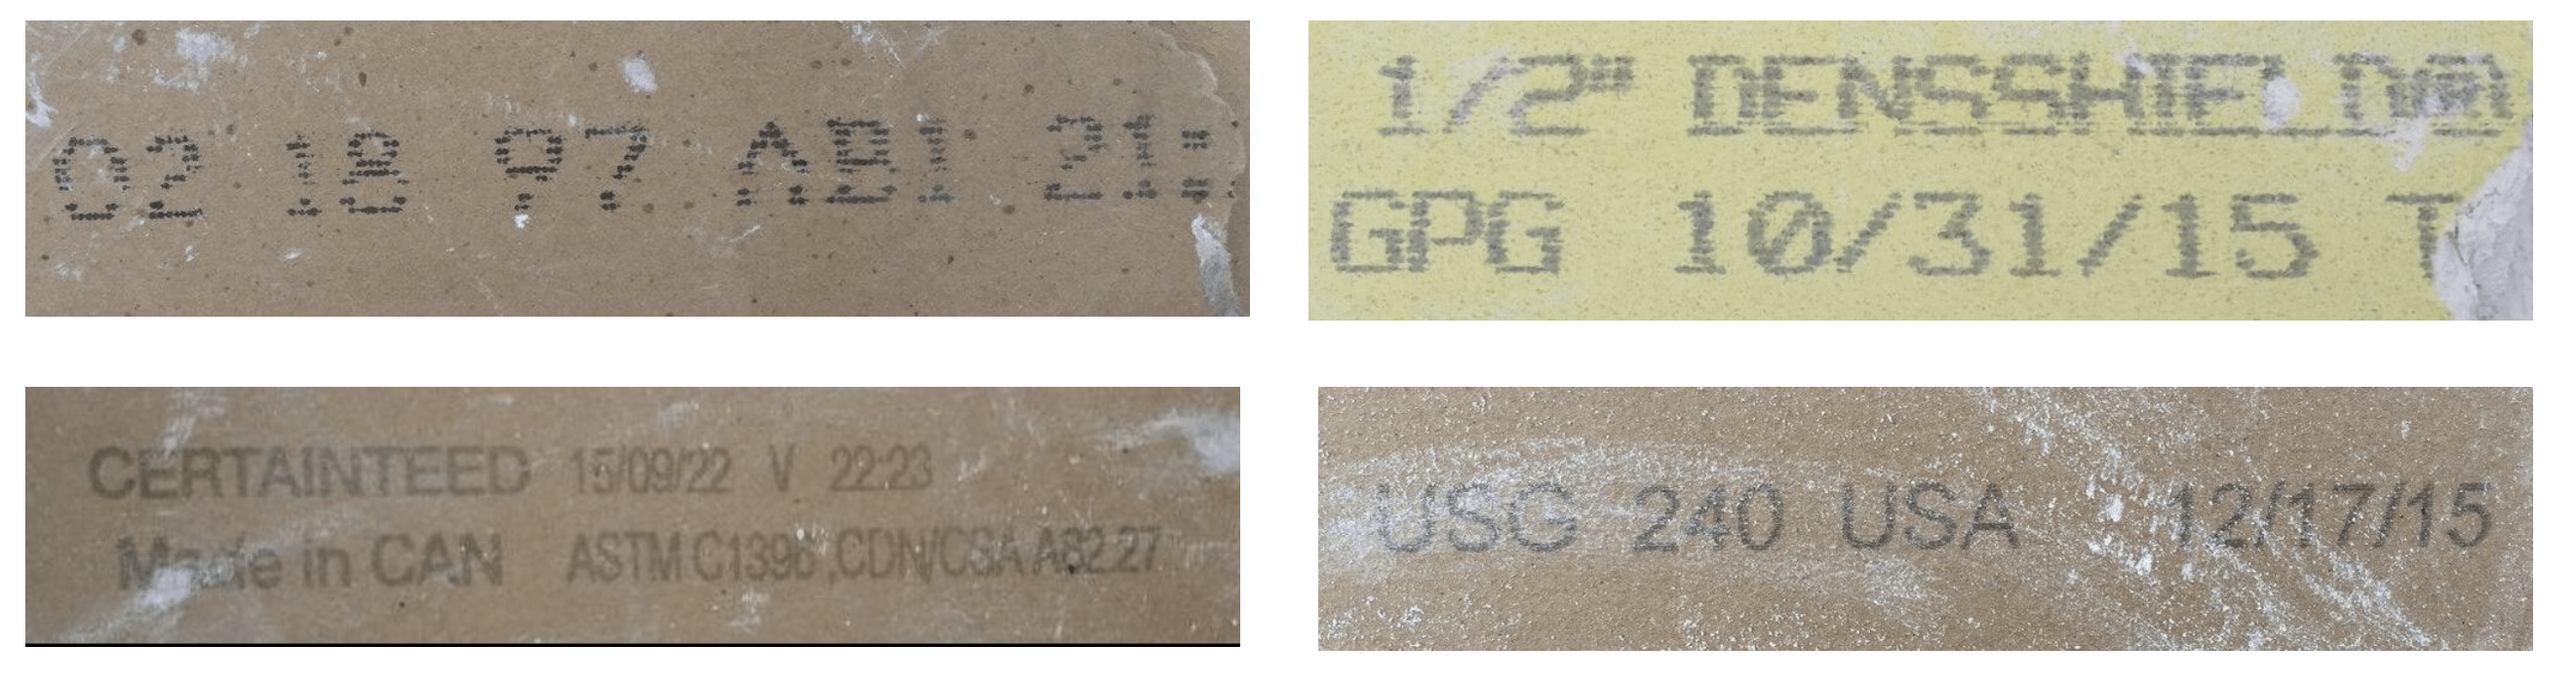 drywall date stamp